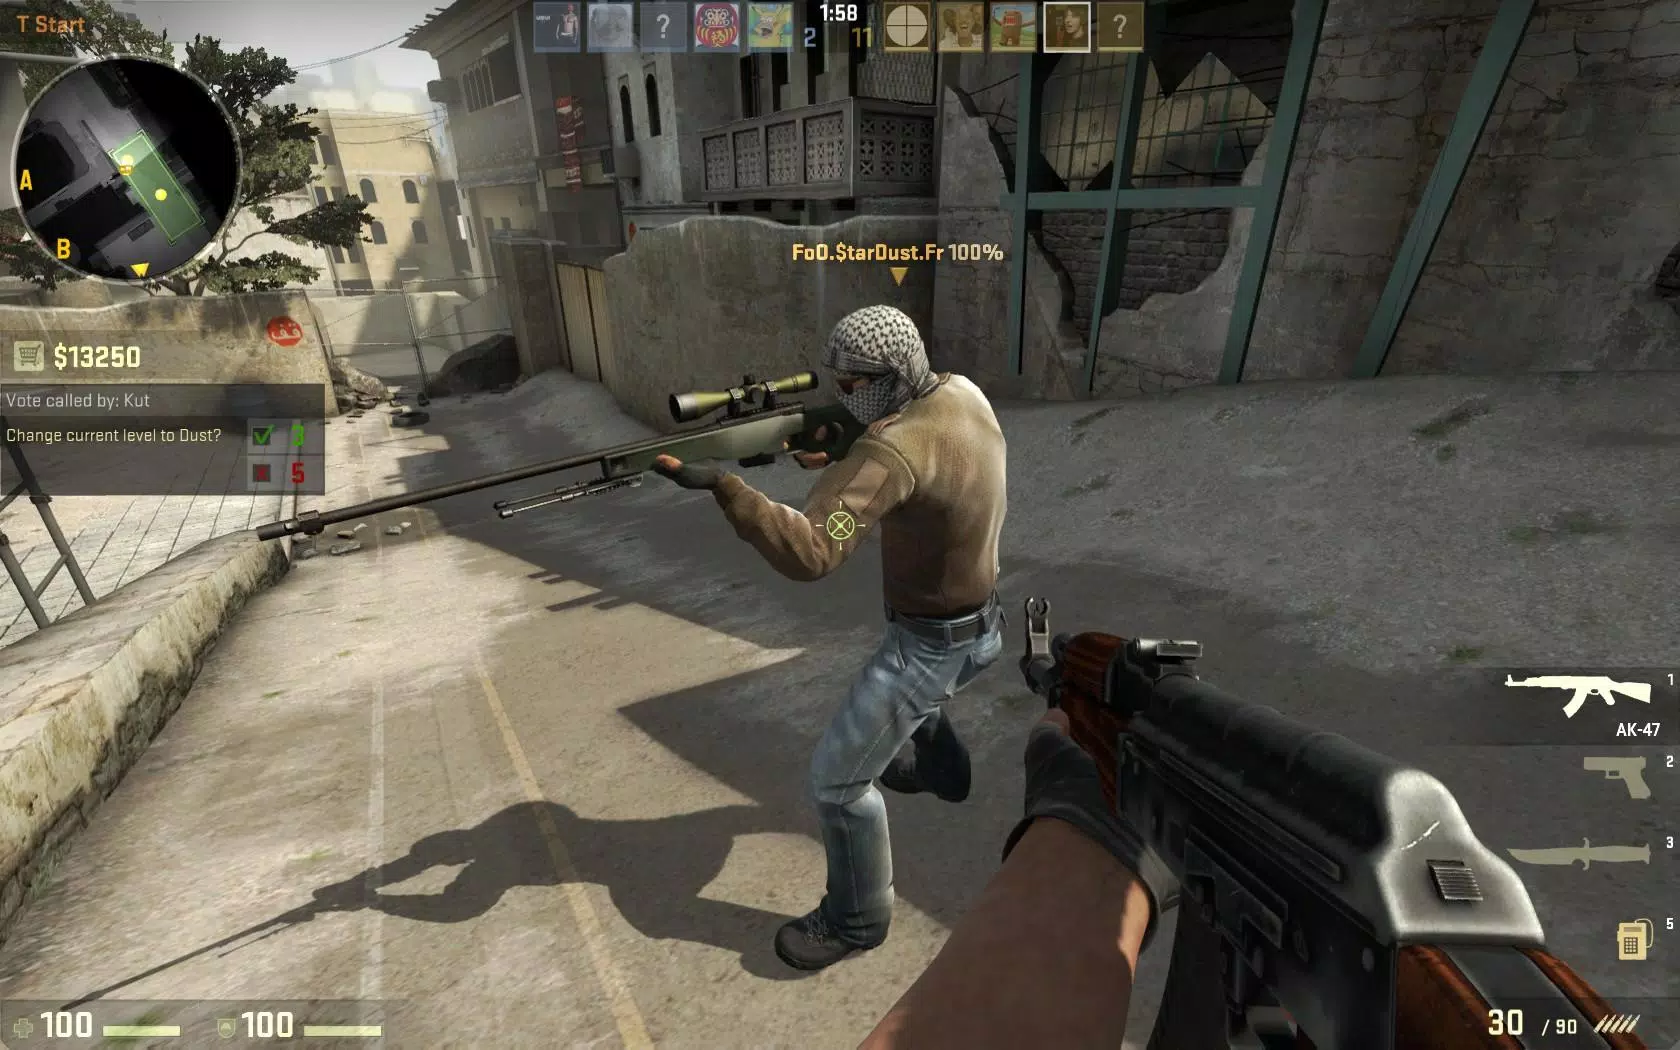 Mobile Counter Strike APK for Android Download